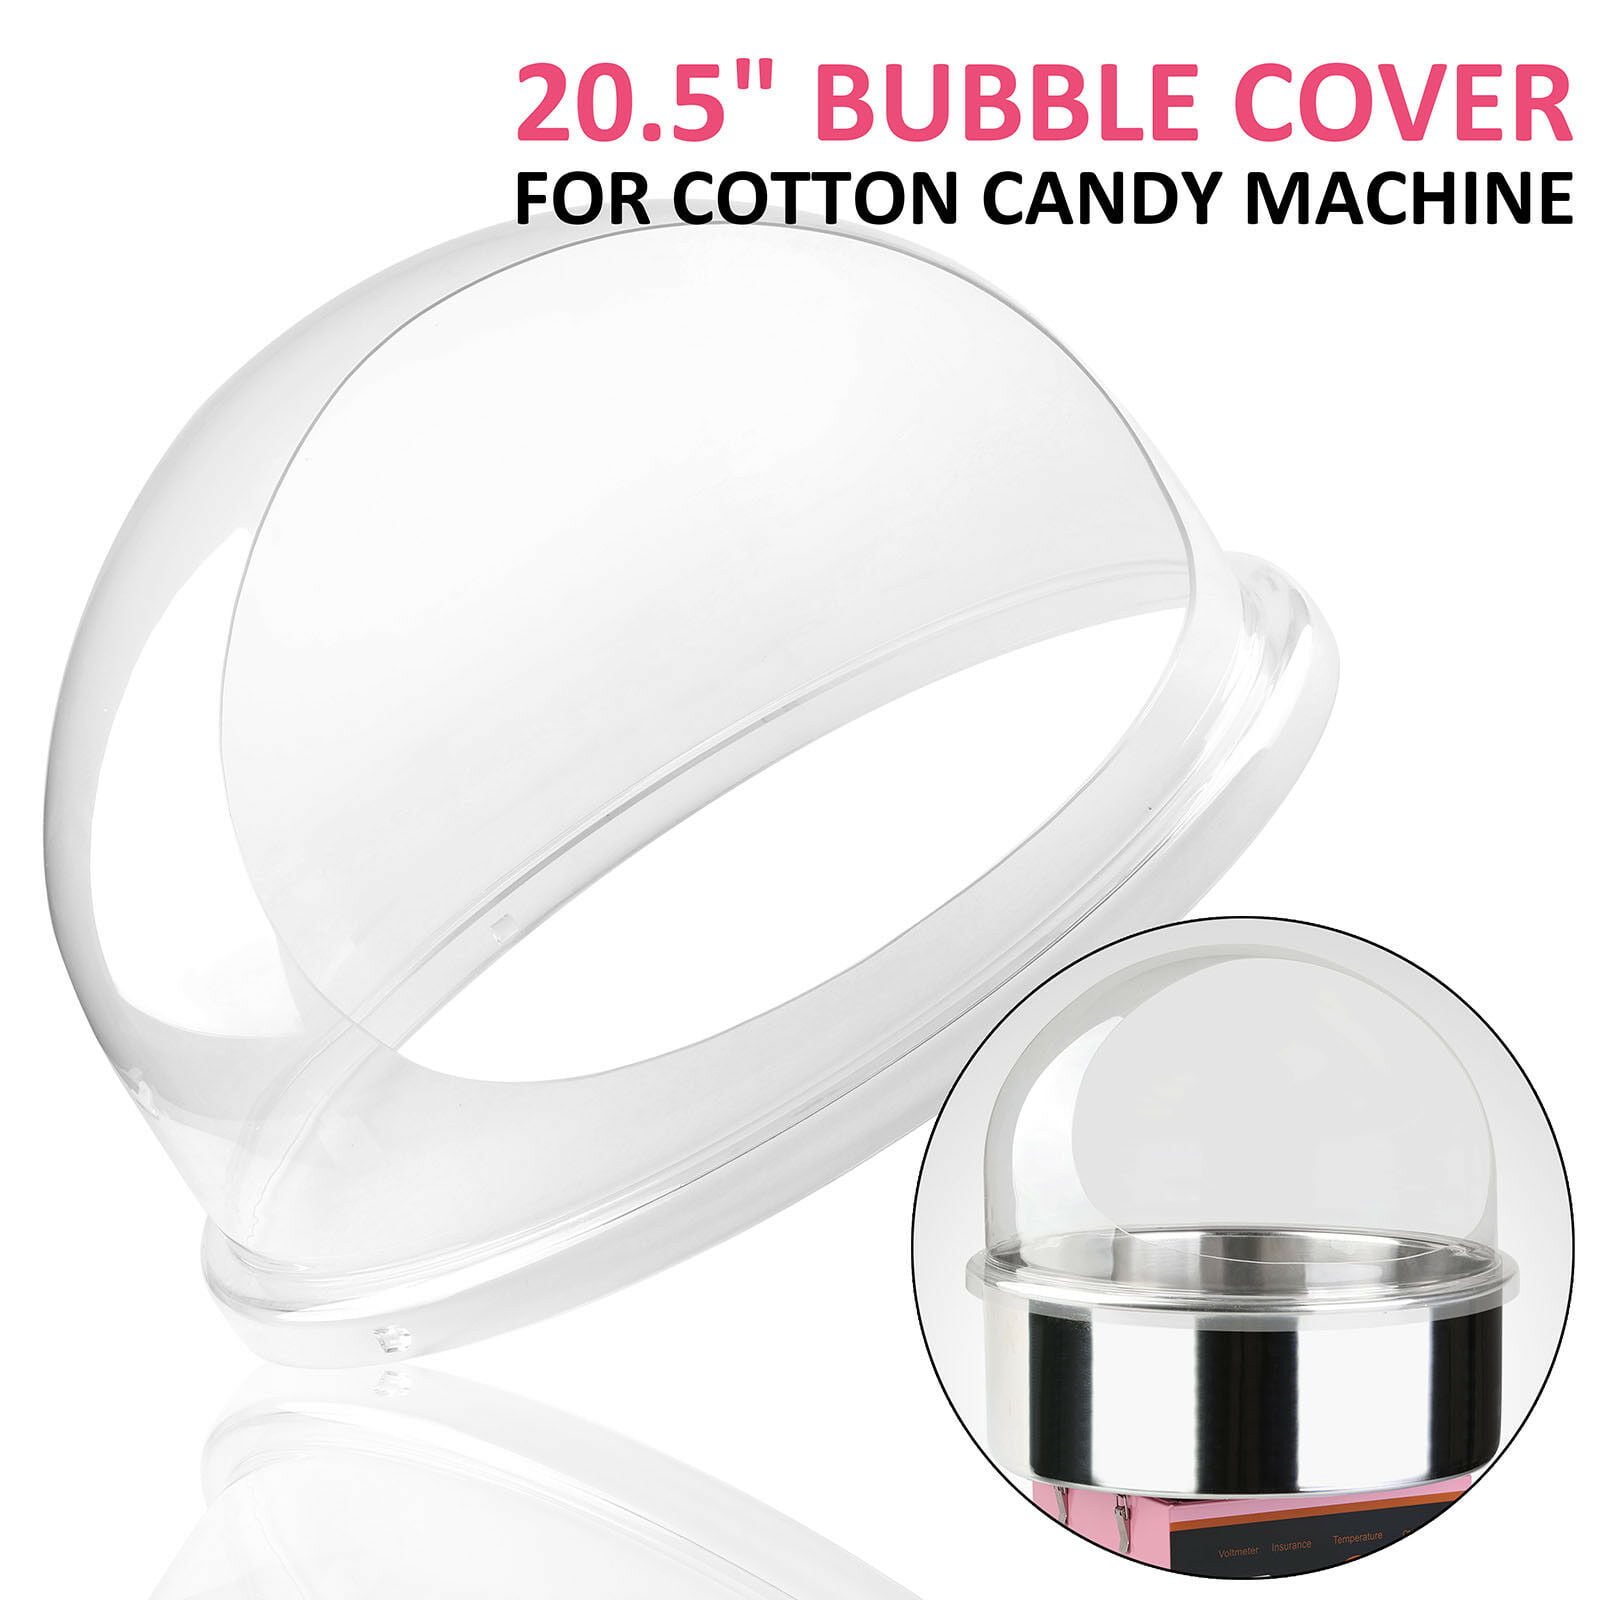 20.5" 52cm Commercial Candy Floss Machine Dome Cover next working day delivery 